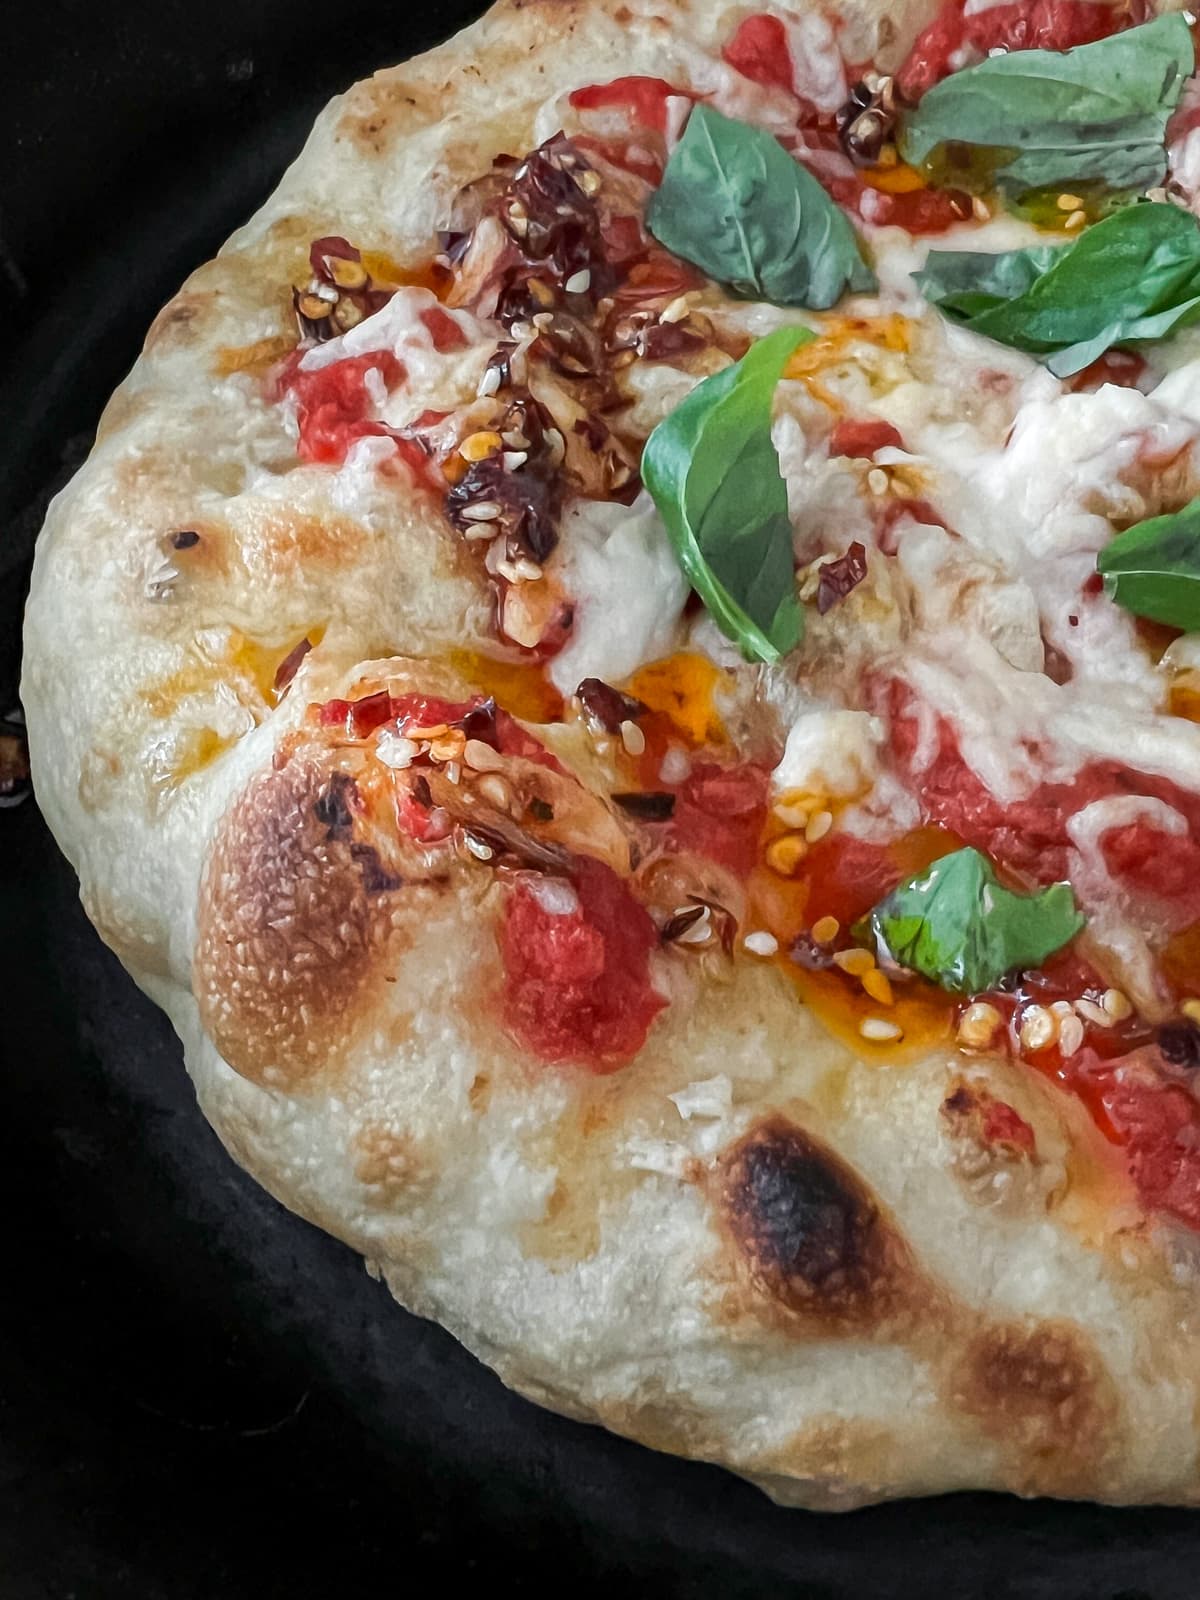 Homemade pizza crust loaded with pizza sauce, vegan cheese and toppings.